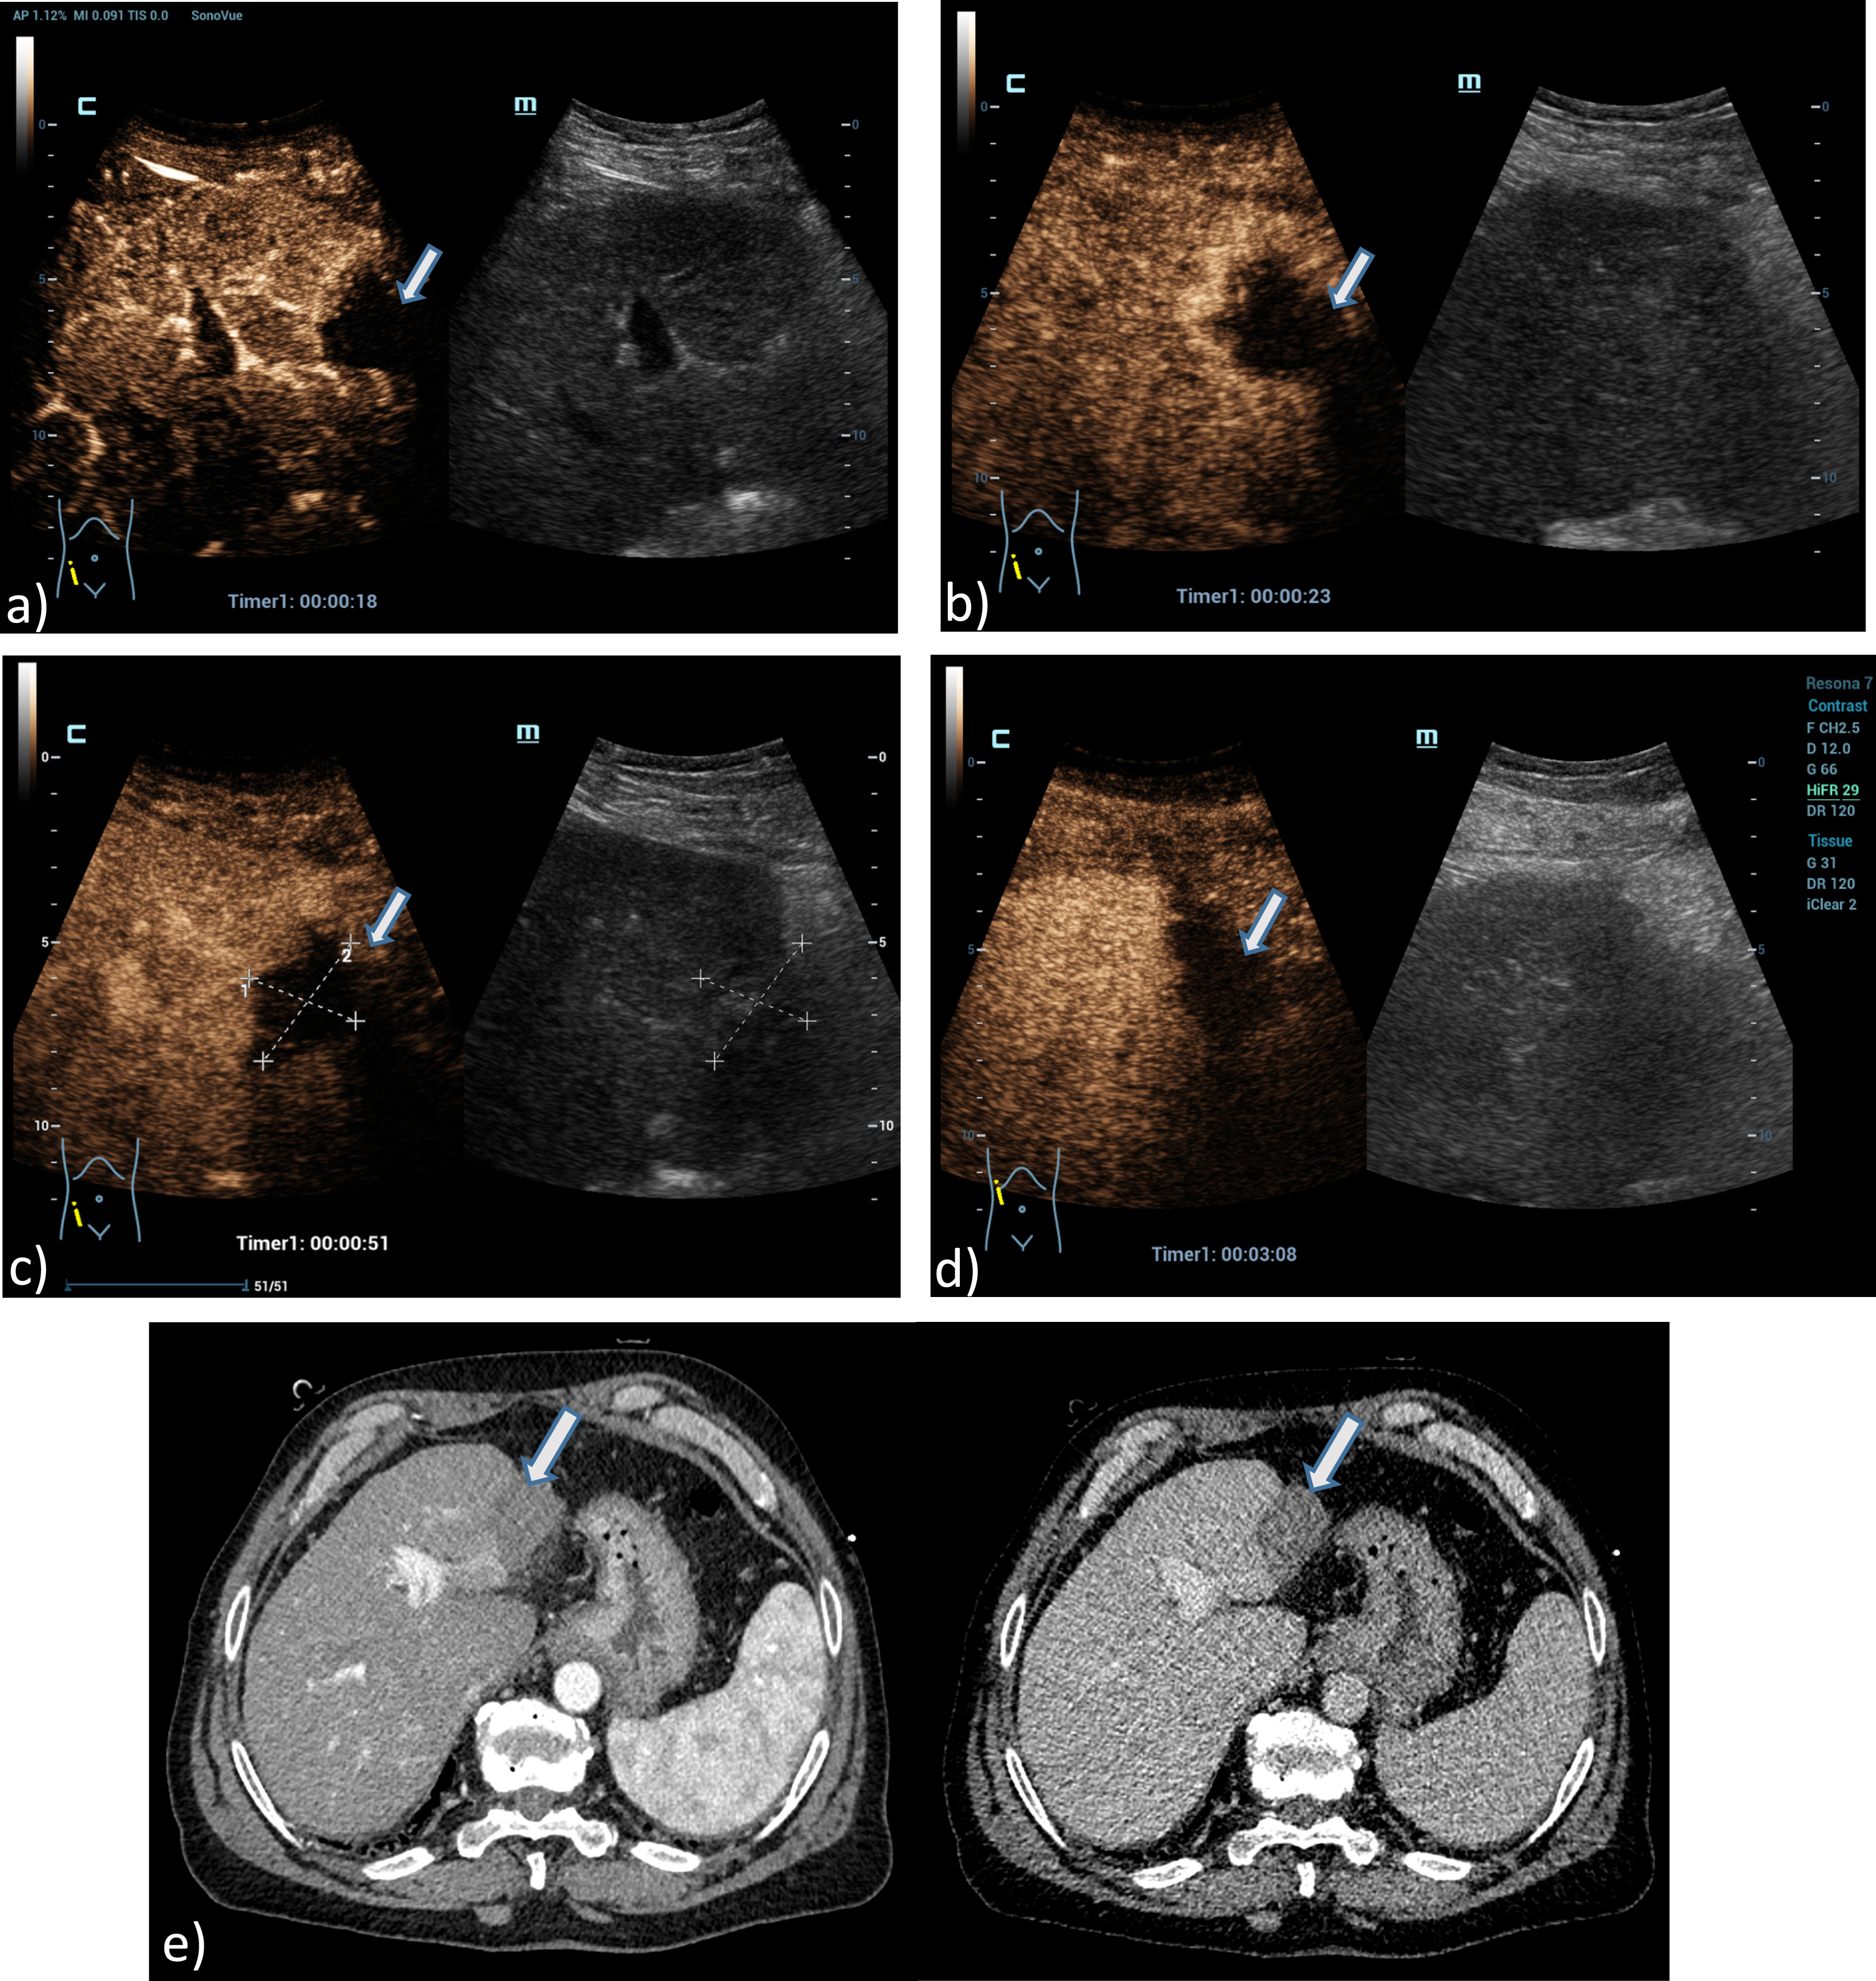 A 61 years old patient with post ablation defect after MWA. Detection of an avascular defect on the left liver lobe, at maximum 4 cm in diameter using the HiFR CEUS technology after bolus injection of 1.5 ml ultrasound contrast agent (left side, arrow). Clear detectable MWA defect by HiFR CEUS with central devascularization during early arterial phase (a), arterial phase (b), portal venous phase (c) and up to late phase after 3 minutes (d) in comparison to contrast enhanced CT scans (e) during arterial phase (left) and portal venous phase (right) as a vascular defect on the left liver lobe (arrows). The lesion is not clear visible on fundamental B-mode.